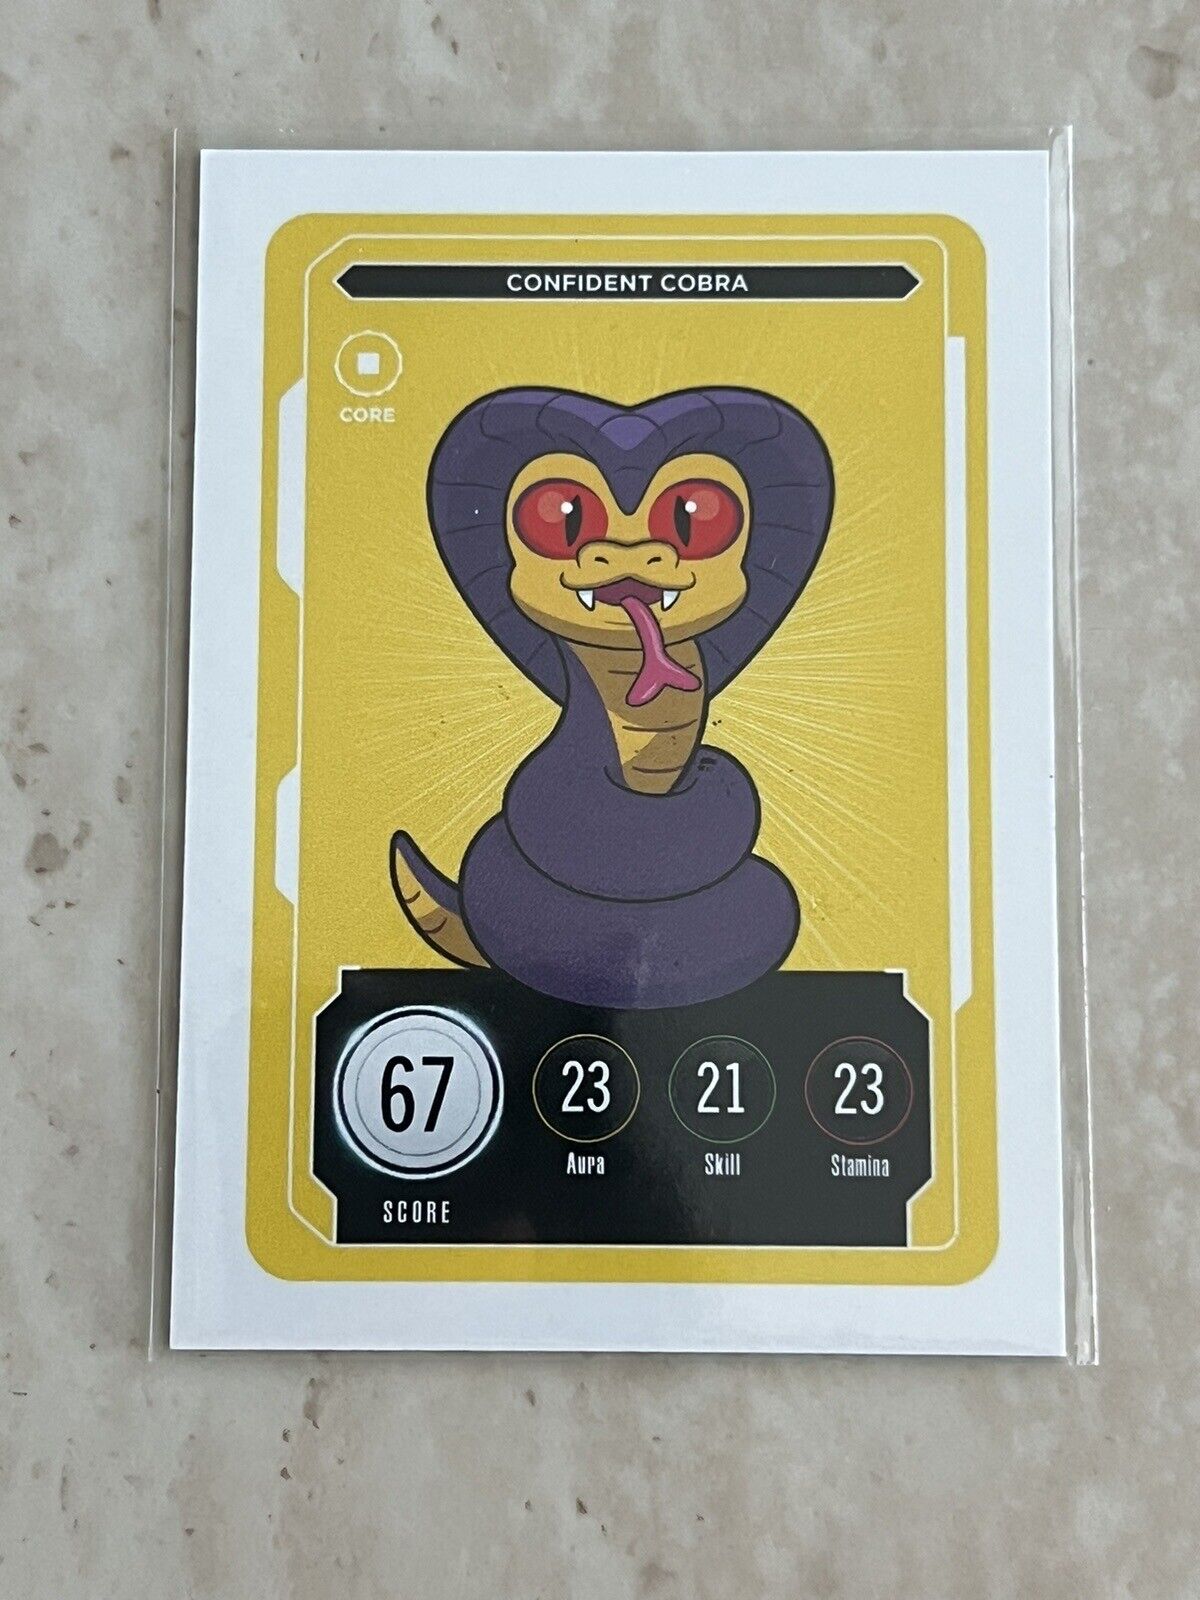 Confident Cobra VeeFriends Compete and Collect CORE Series 2 Gary Vee